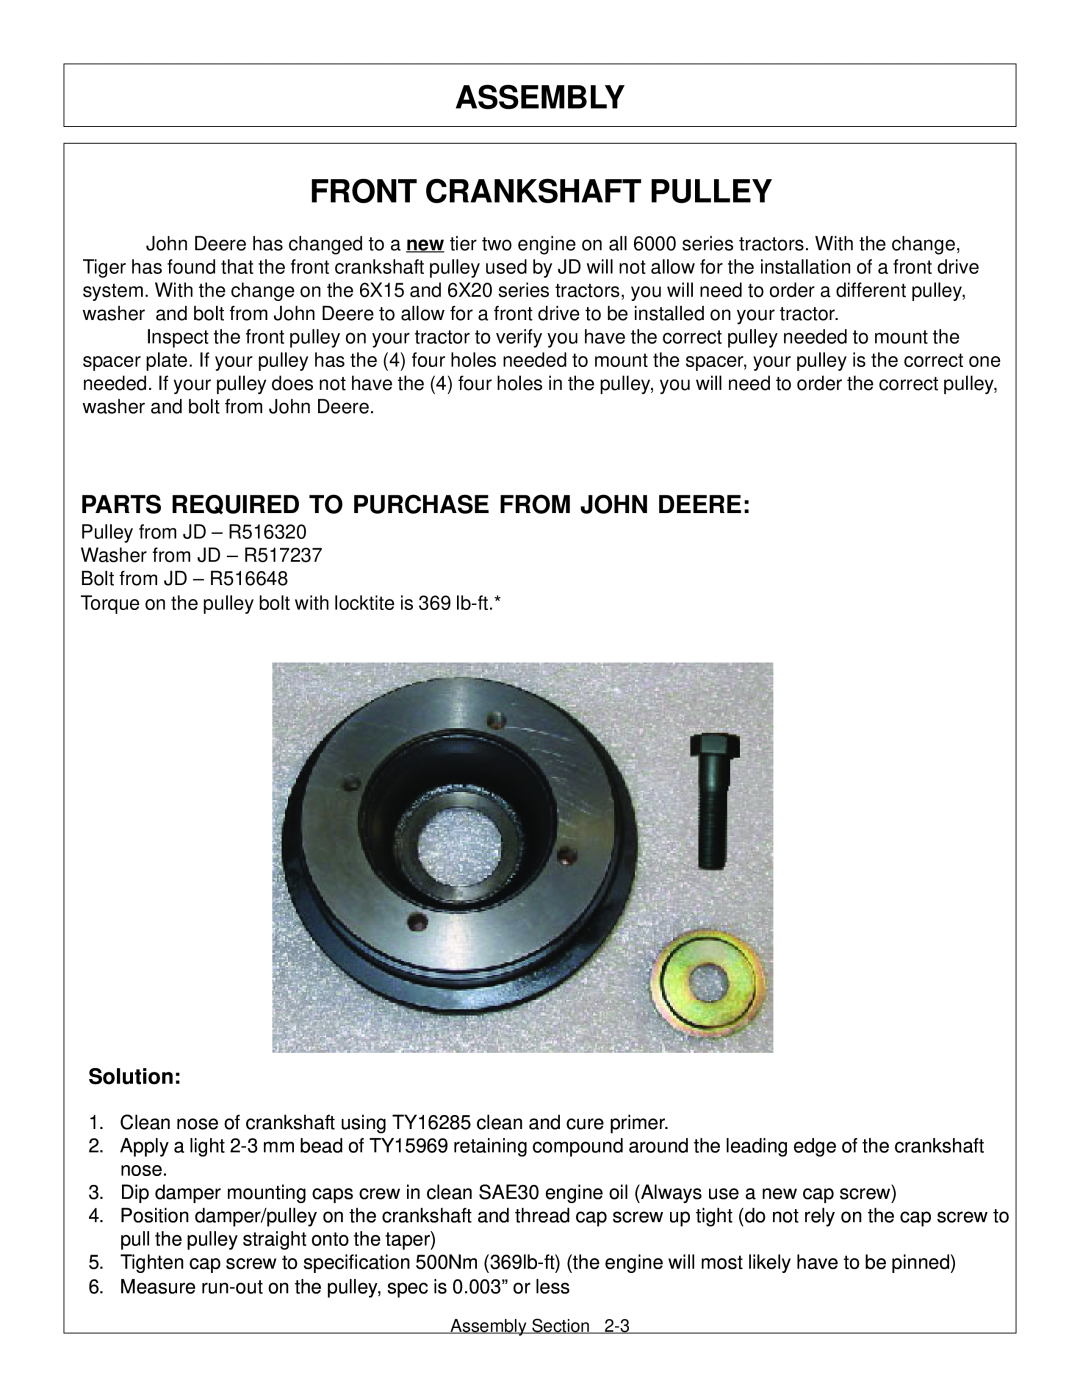 Tiger Products Co., Ltd JD 72-7520 Front Crankshaft Pulley, Parts Required To Purchase From John Deere, Assembly, Solution 